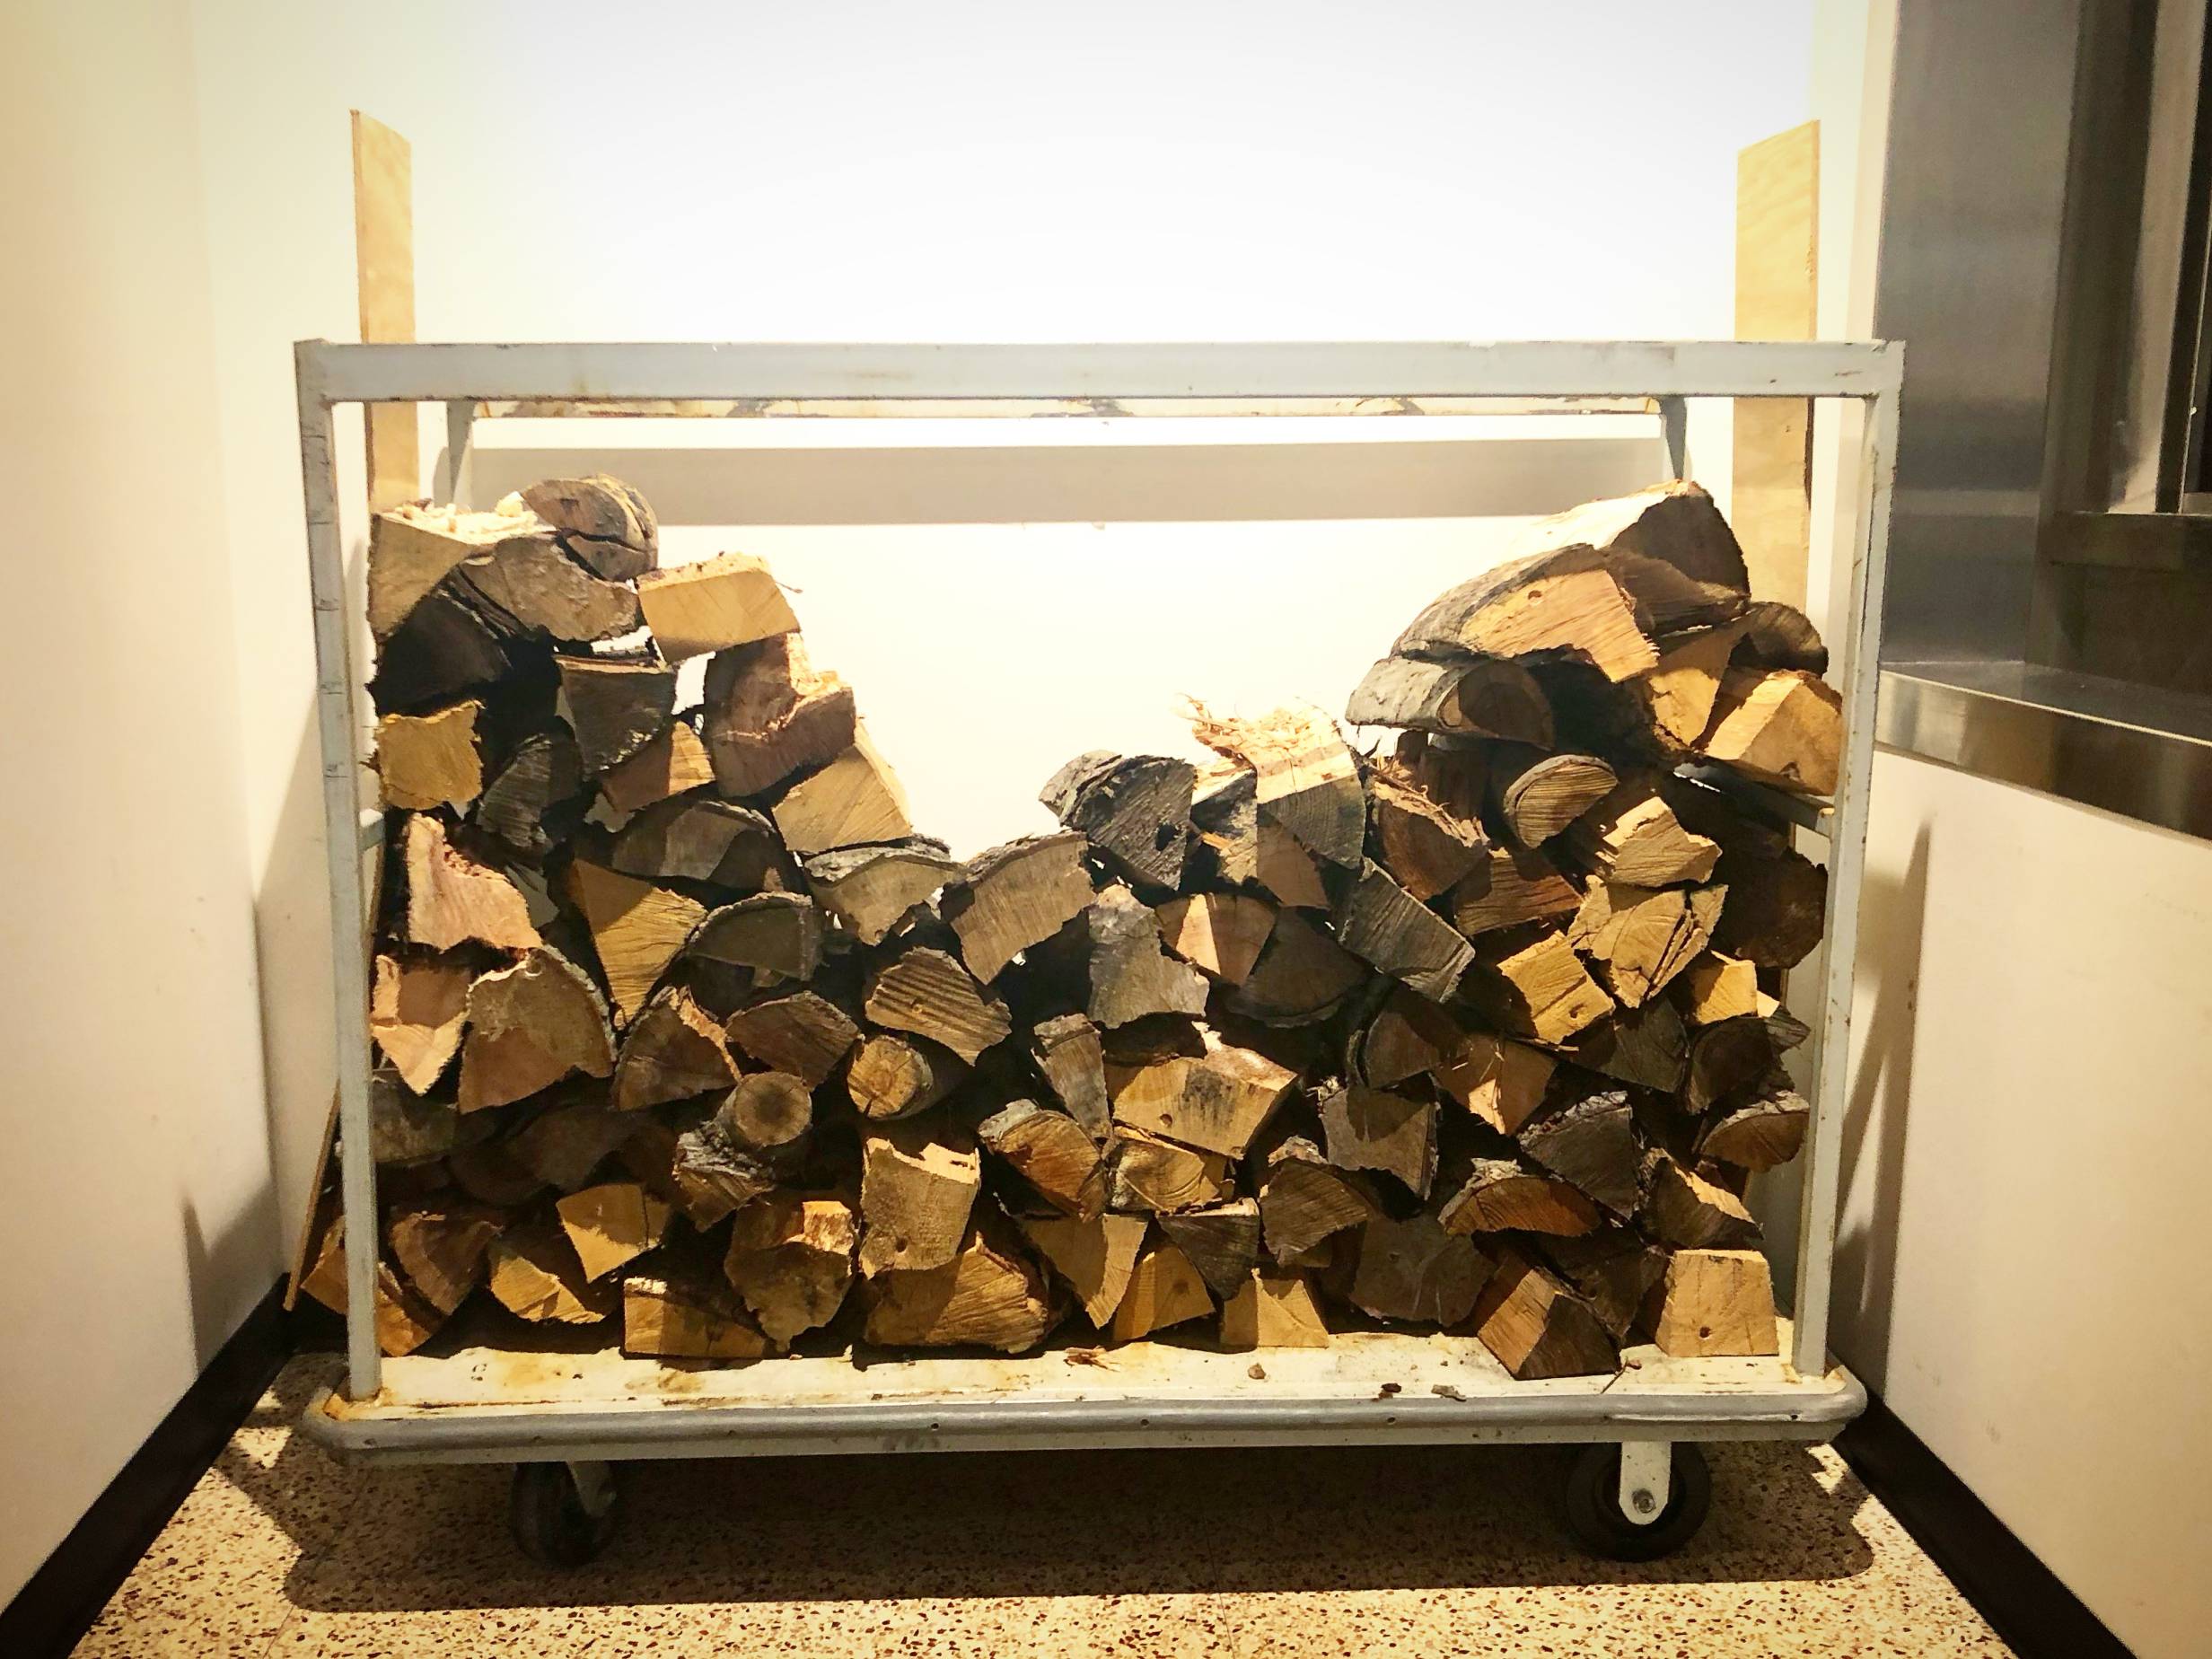 Many cut firewood pieces are stacked on a metal stand. Photo by Alyssa Buckley.